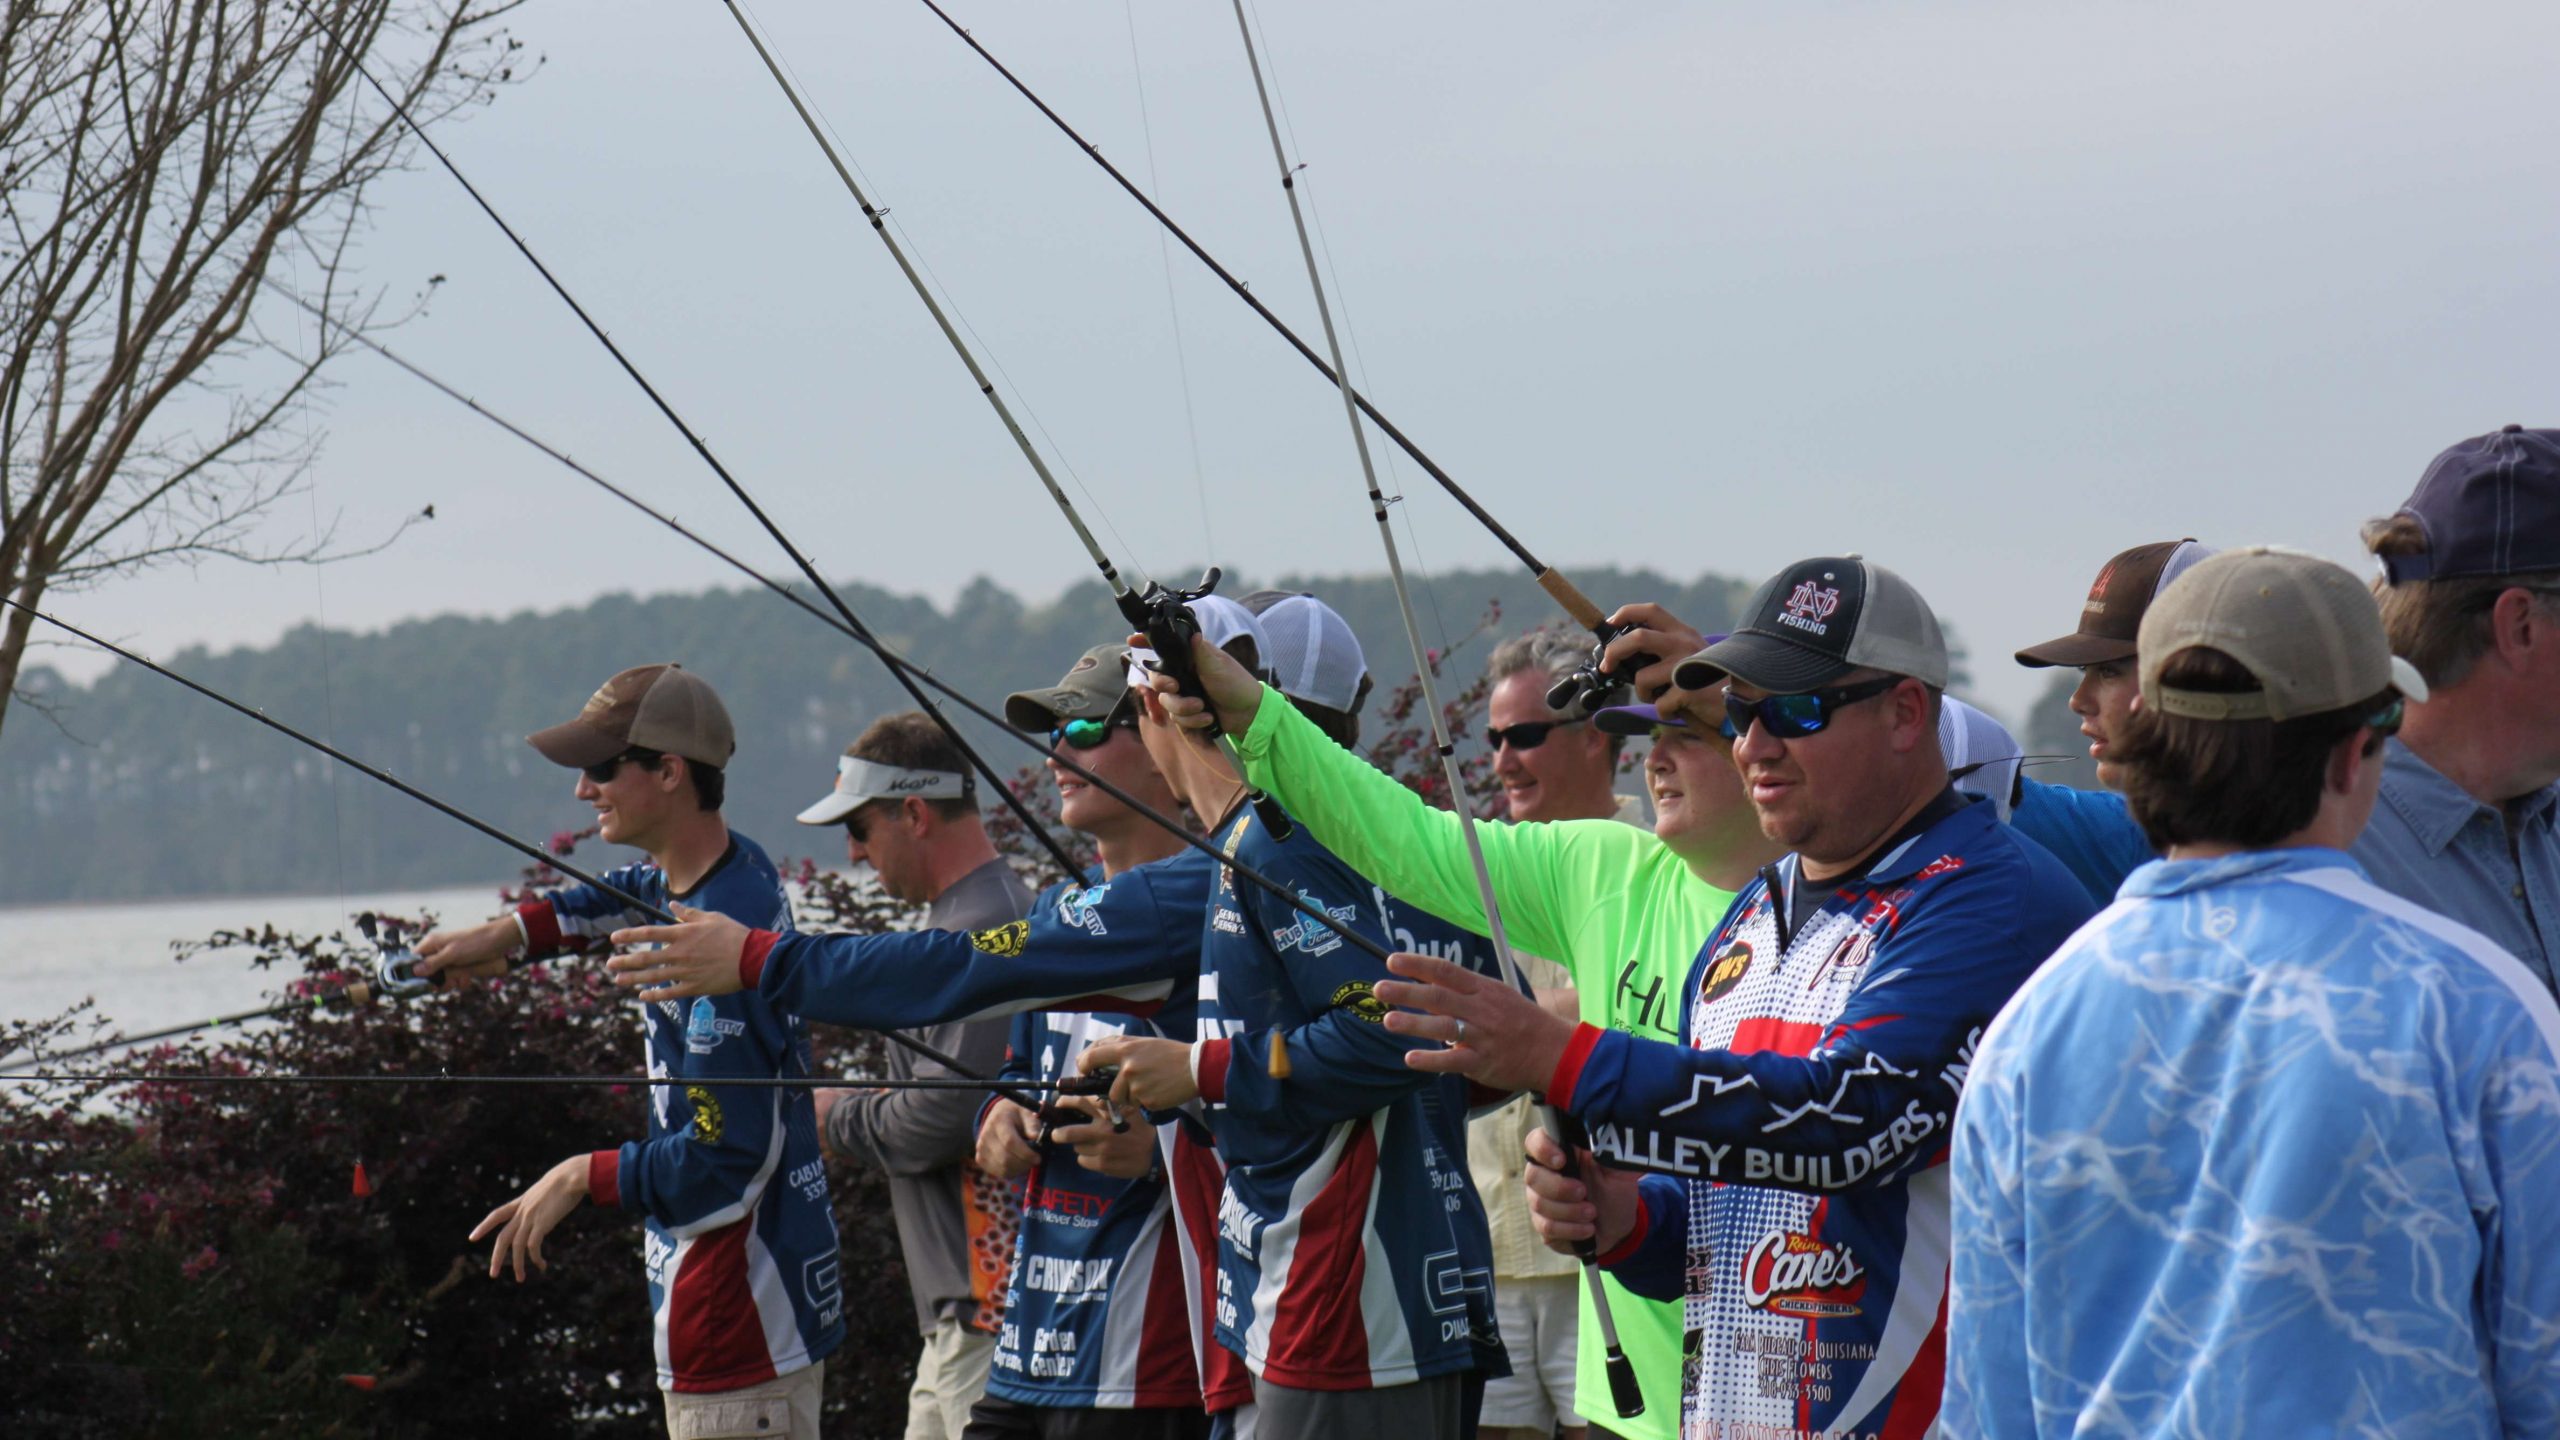 Registration for the 2017 Costa Bassmaster High School Central
Open was held at Cypress Bend Marina on Toledo Bend Reservoir in
northwest Louisiana on Friday. Approximately 180 tandems from
throughout the United States will compete in the one-day tournament
which will be held Saturday on Toledo Bend, ranked as the No. 1 bass
fishery in the country by Bassmaster.com. Here, young anglers try
their hand at the Shimano flipping station prior to the 5 p.m.
registration meeting.